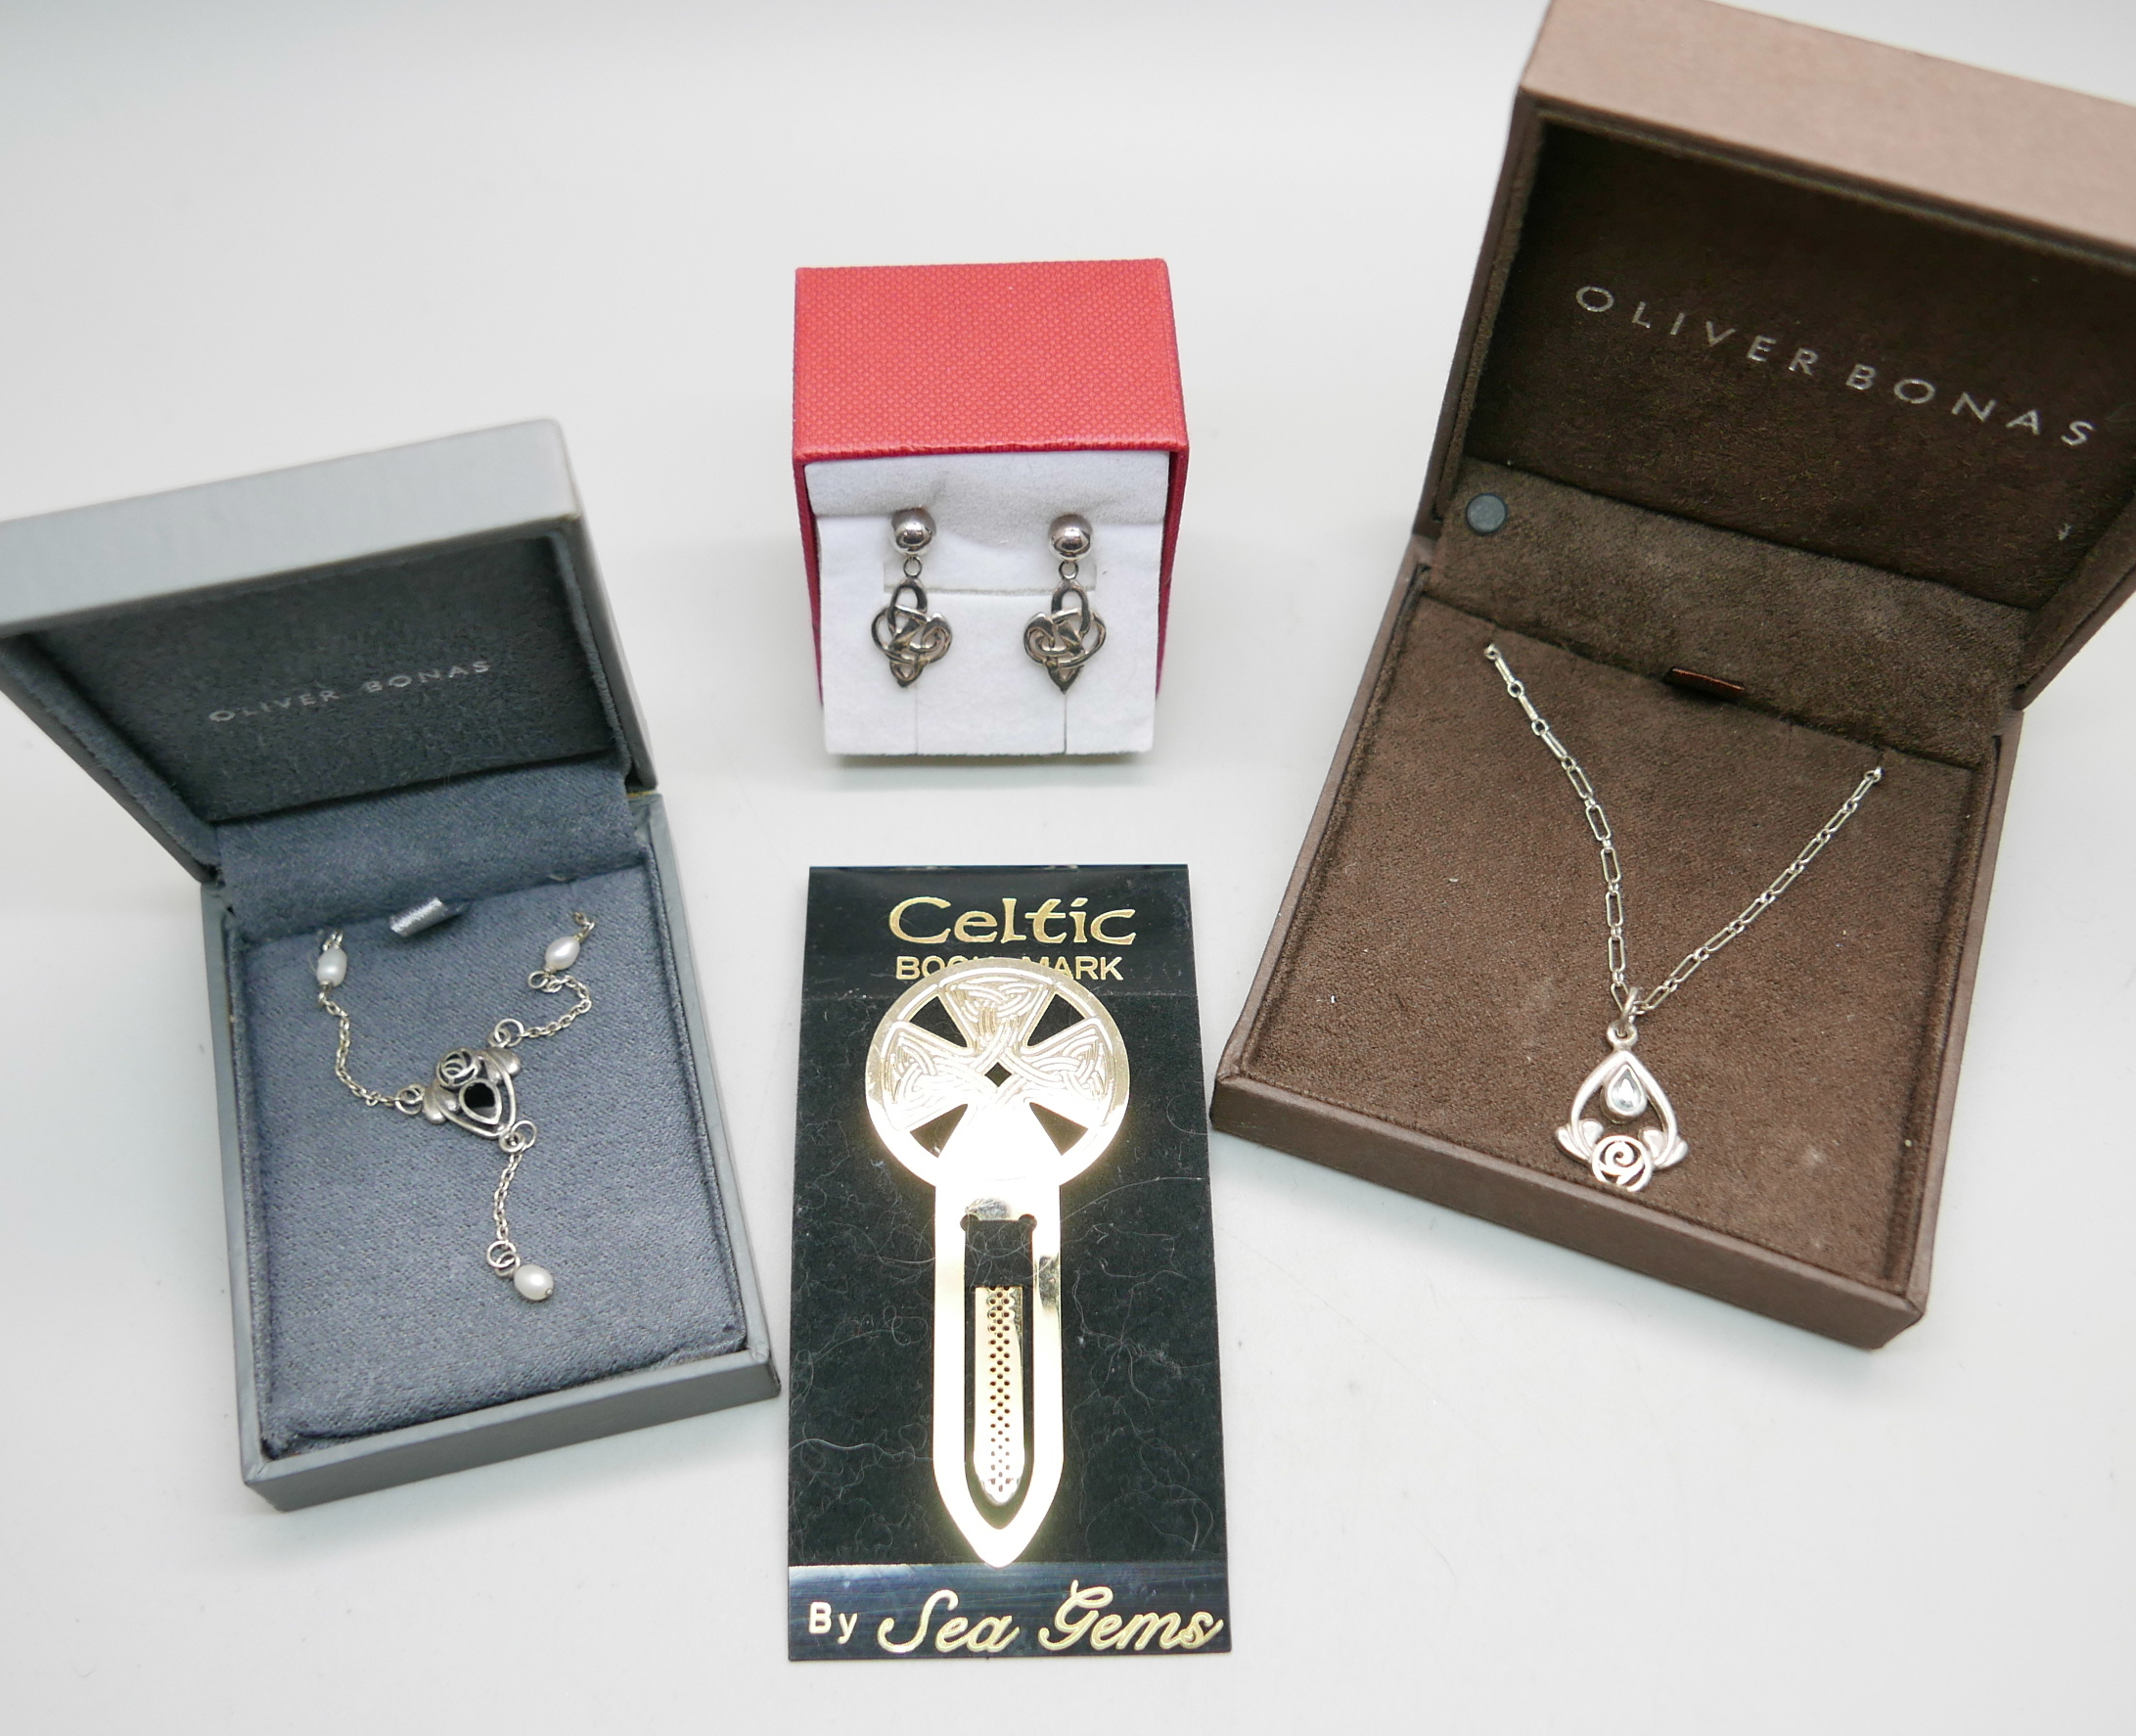 Two silver Celtic necklaces, earrings and a Sea Gems bookmark